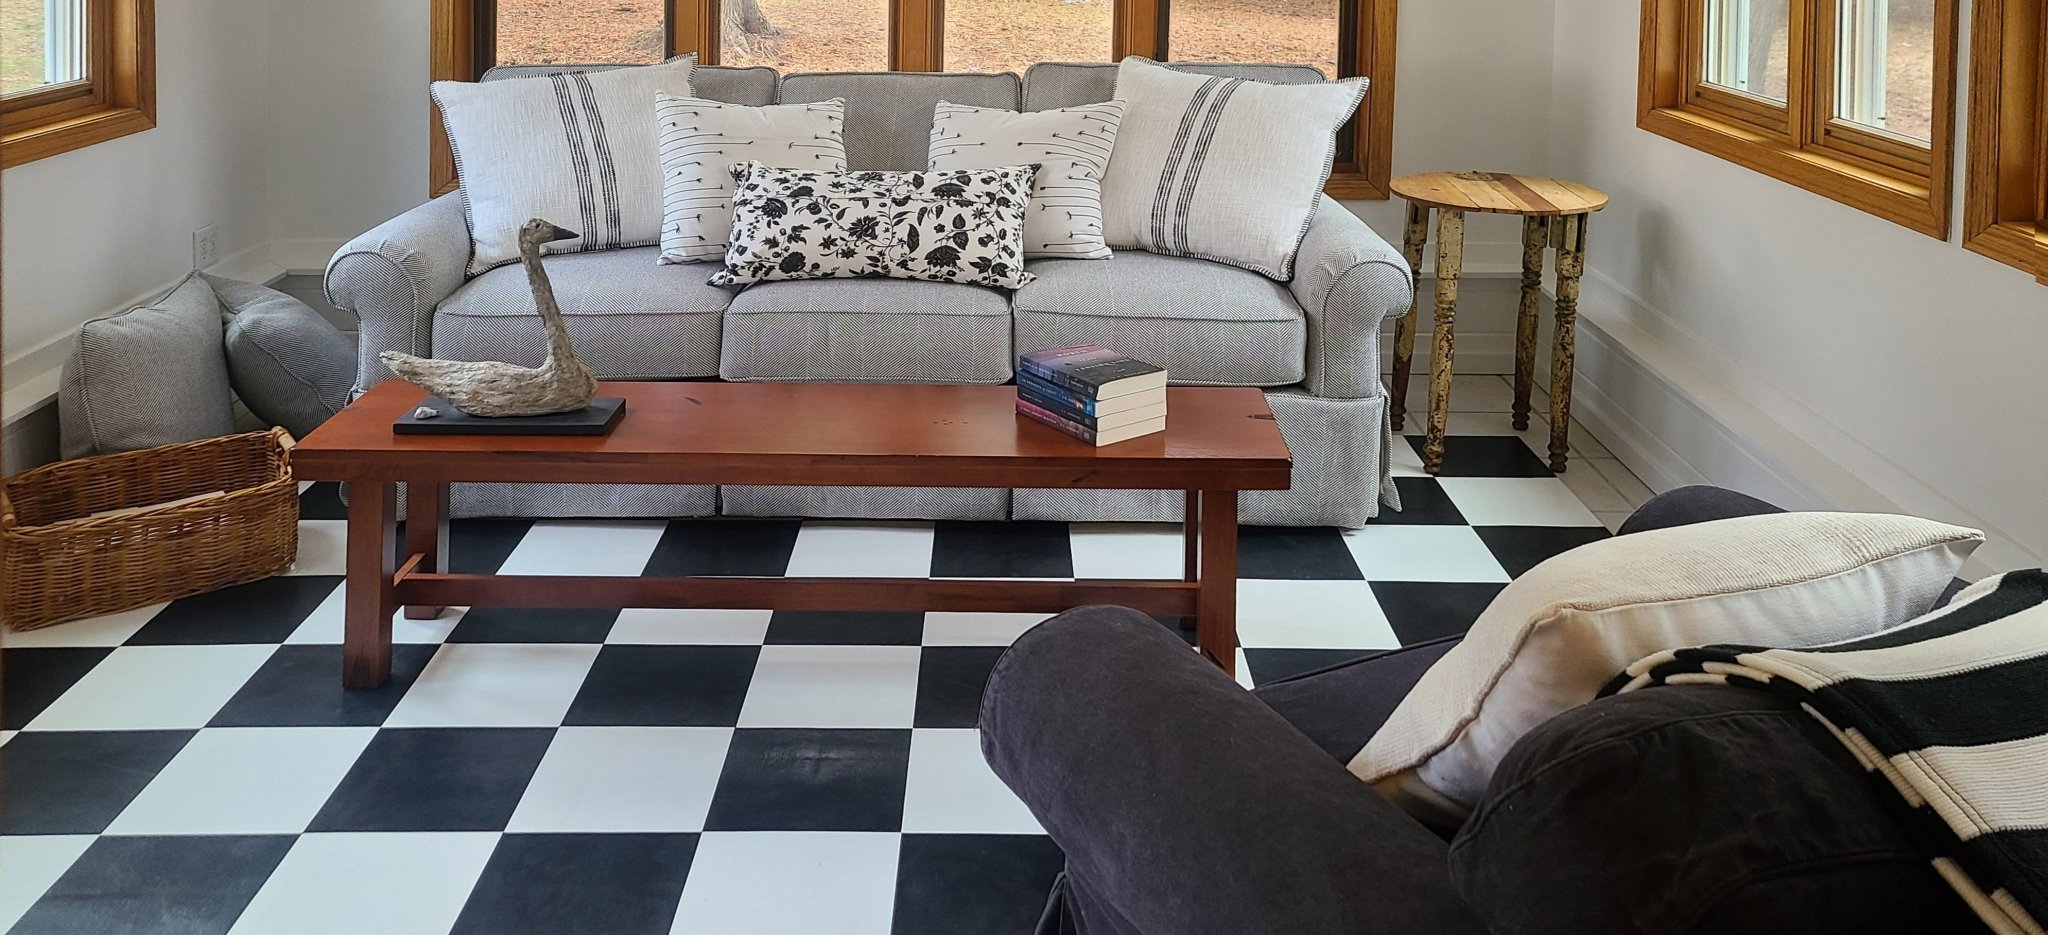 In-situ photo of Checkerboard Floorcloth #1 in the fully appointed guest room. 